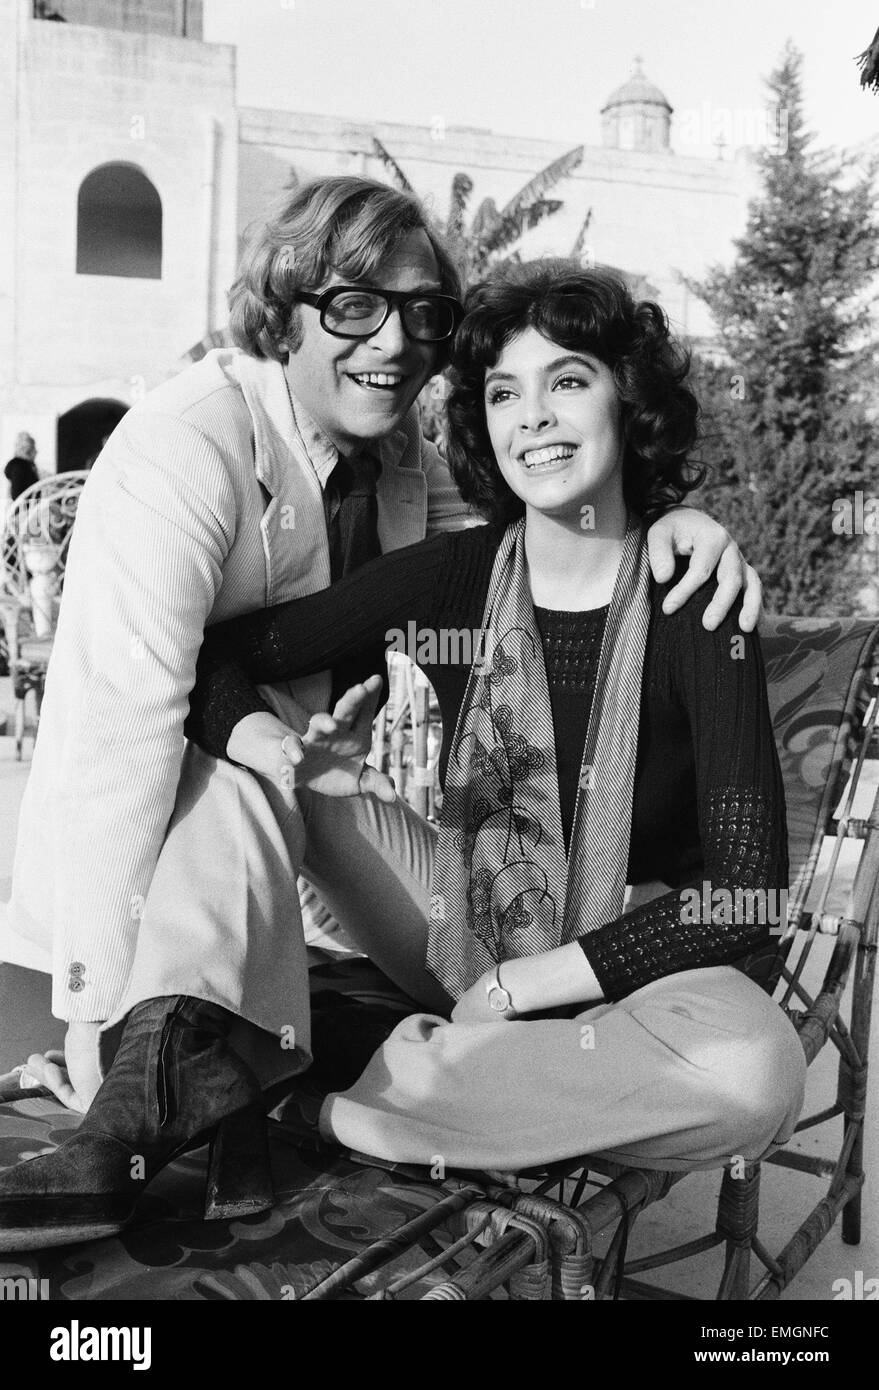 Actor Michael Caine with Nadia Cassini on the set of their new film Pulp during filming in Malta. 17th January 1972. Stock Photo